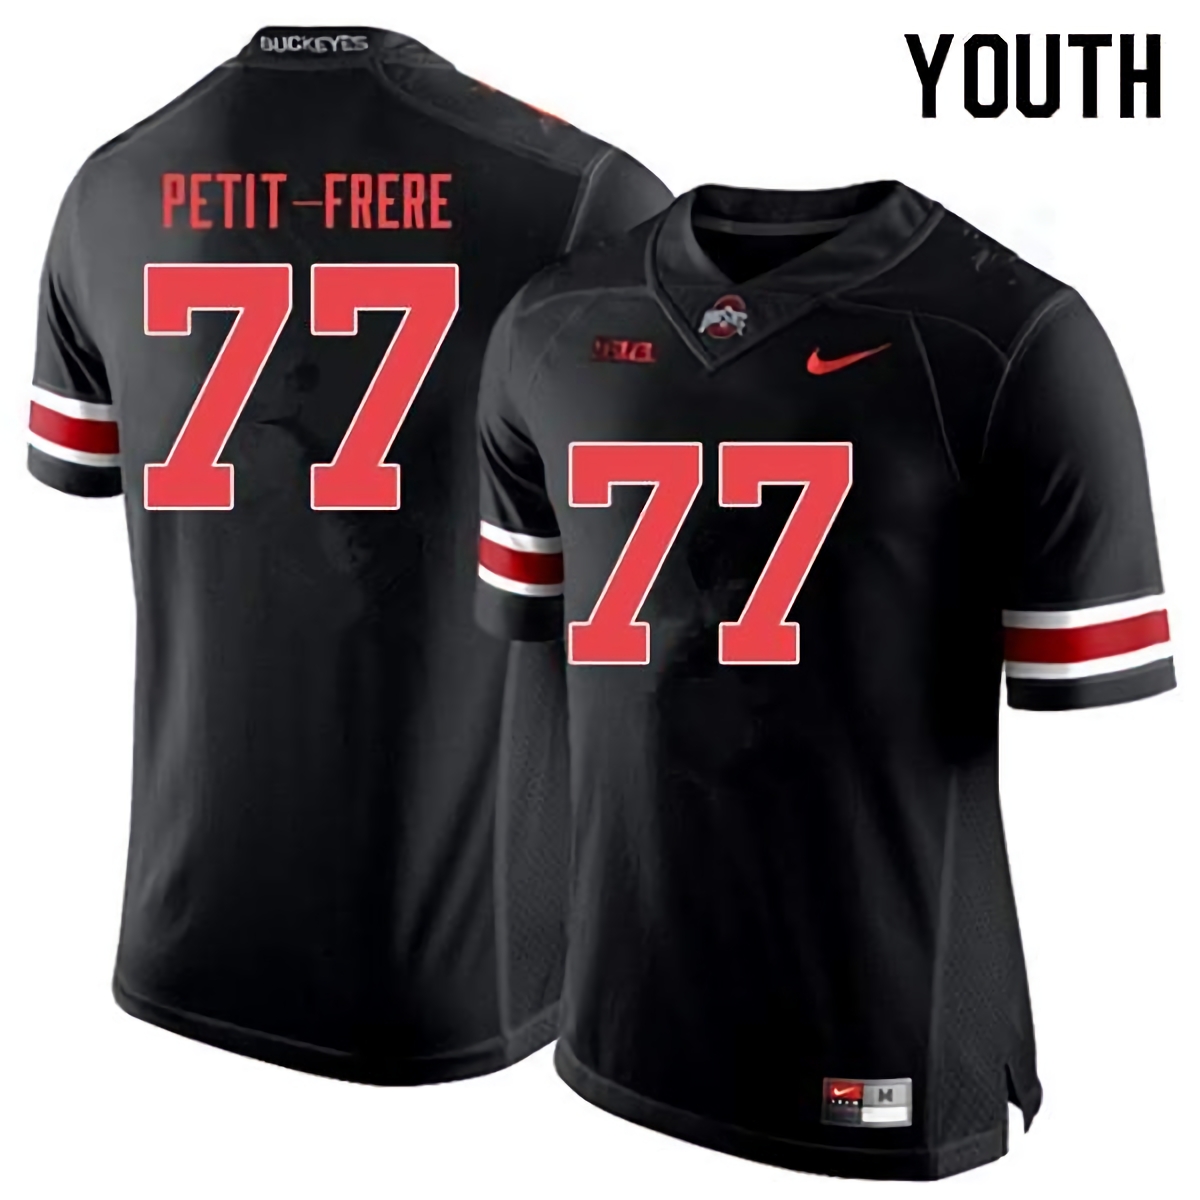 Nicholas Petit-Frere Ohio State Buckeyes Youth NCAA #77 Nike Black Out College Stitched Football Jersey DPJ2056NK